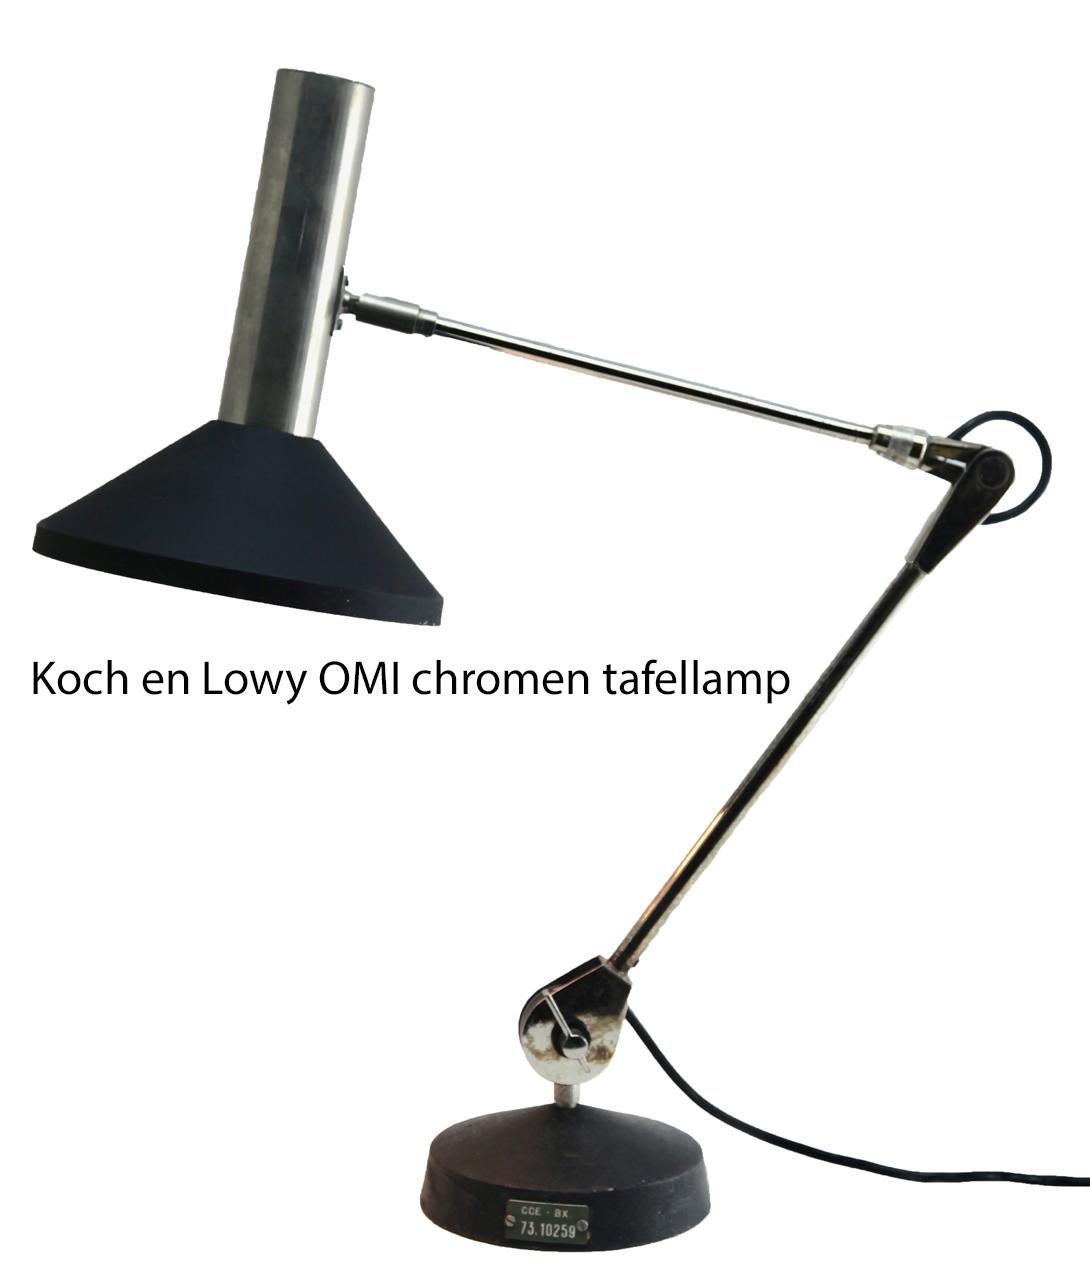 Beautiful Desk Lamp Adjustable in chrome and black metal Hillebrand Germany, 1960s.
The original switch allows illuminating.
Every component passed by our strict internal quality control processes.
The lamp is in good and working condition.
 
And